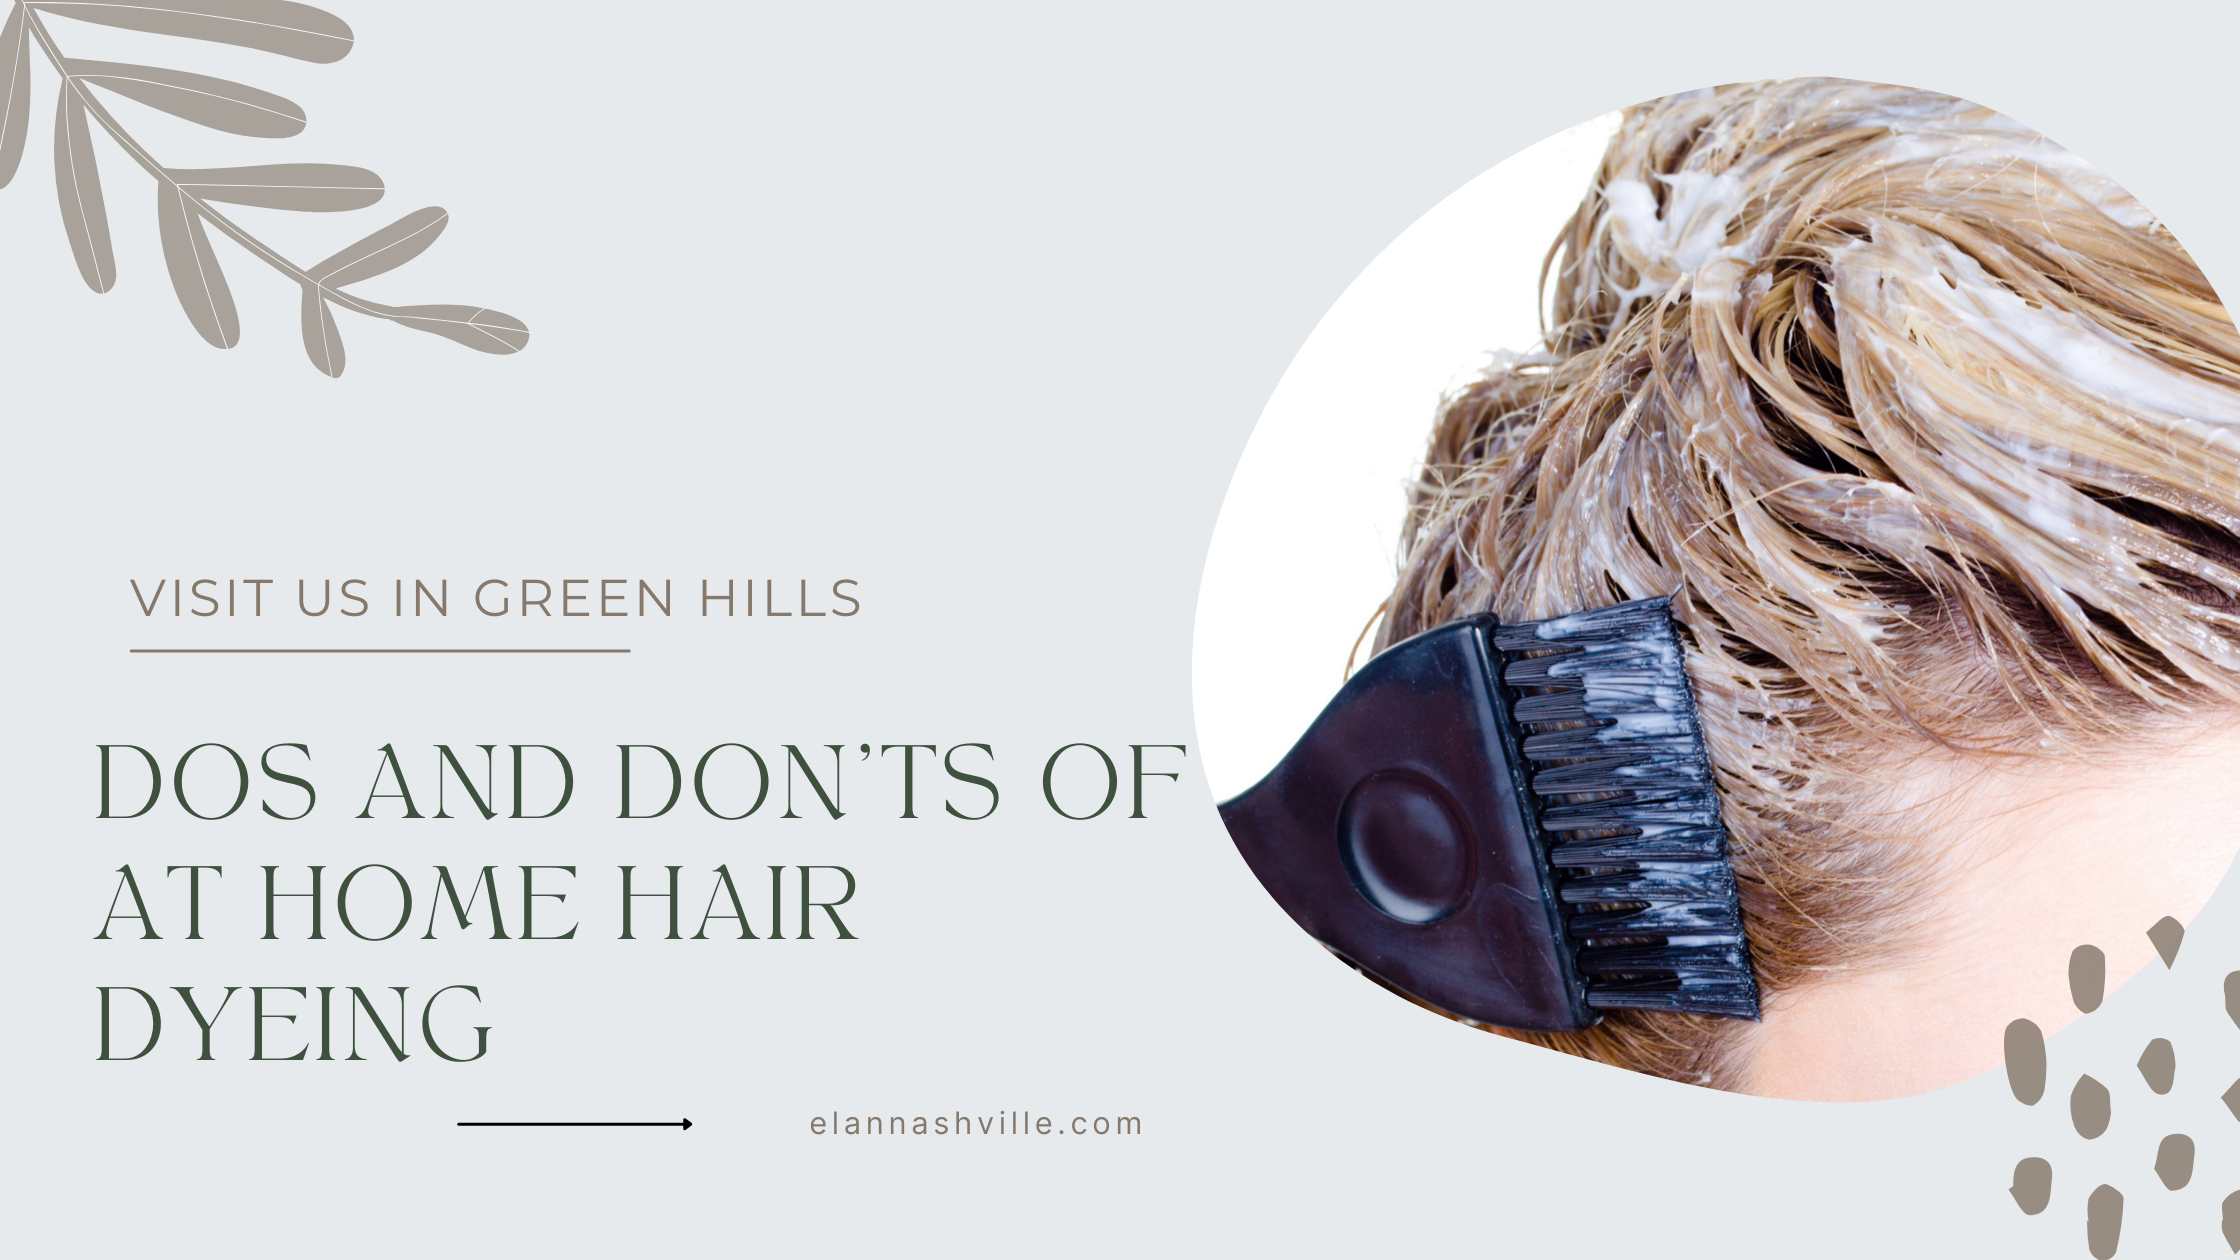 6. "The Dos and Don'ts of Dyeing Your Hair Blue According to Tumblr" - wide 1